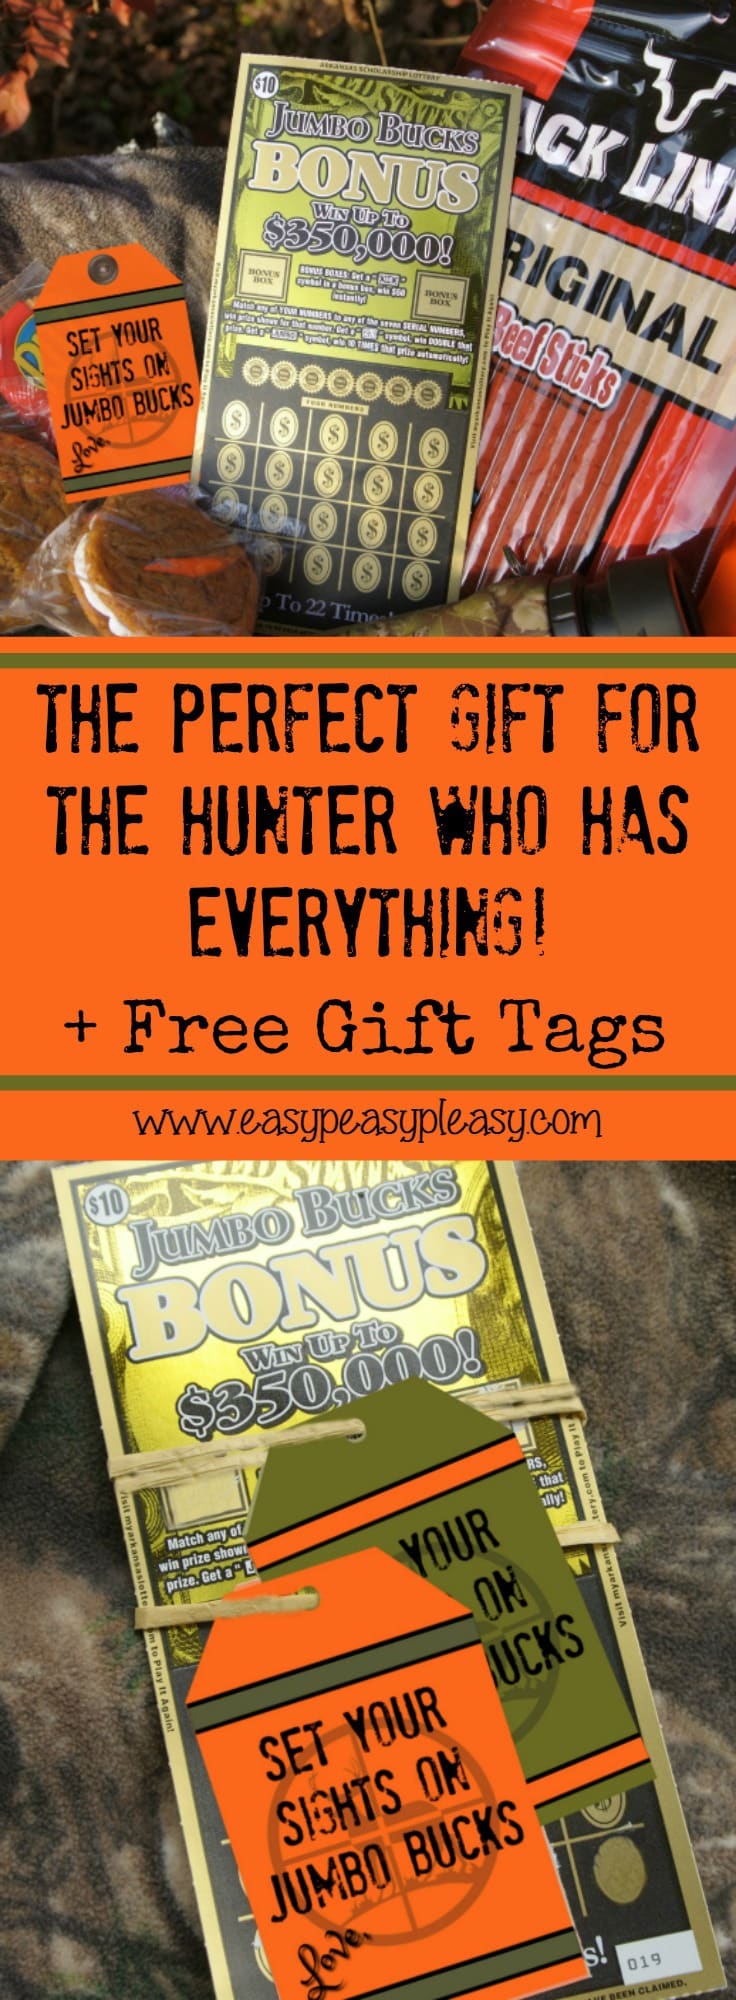 Free printable gift tags and the perfect gift for the hunter who has everything. See how I surprised my favorite hunter with Arkansas Scholarship Lottery Scratch Off Tickets.